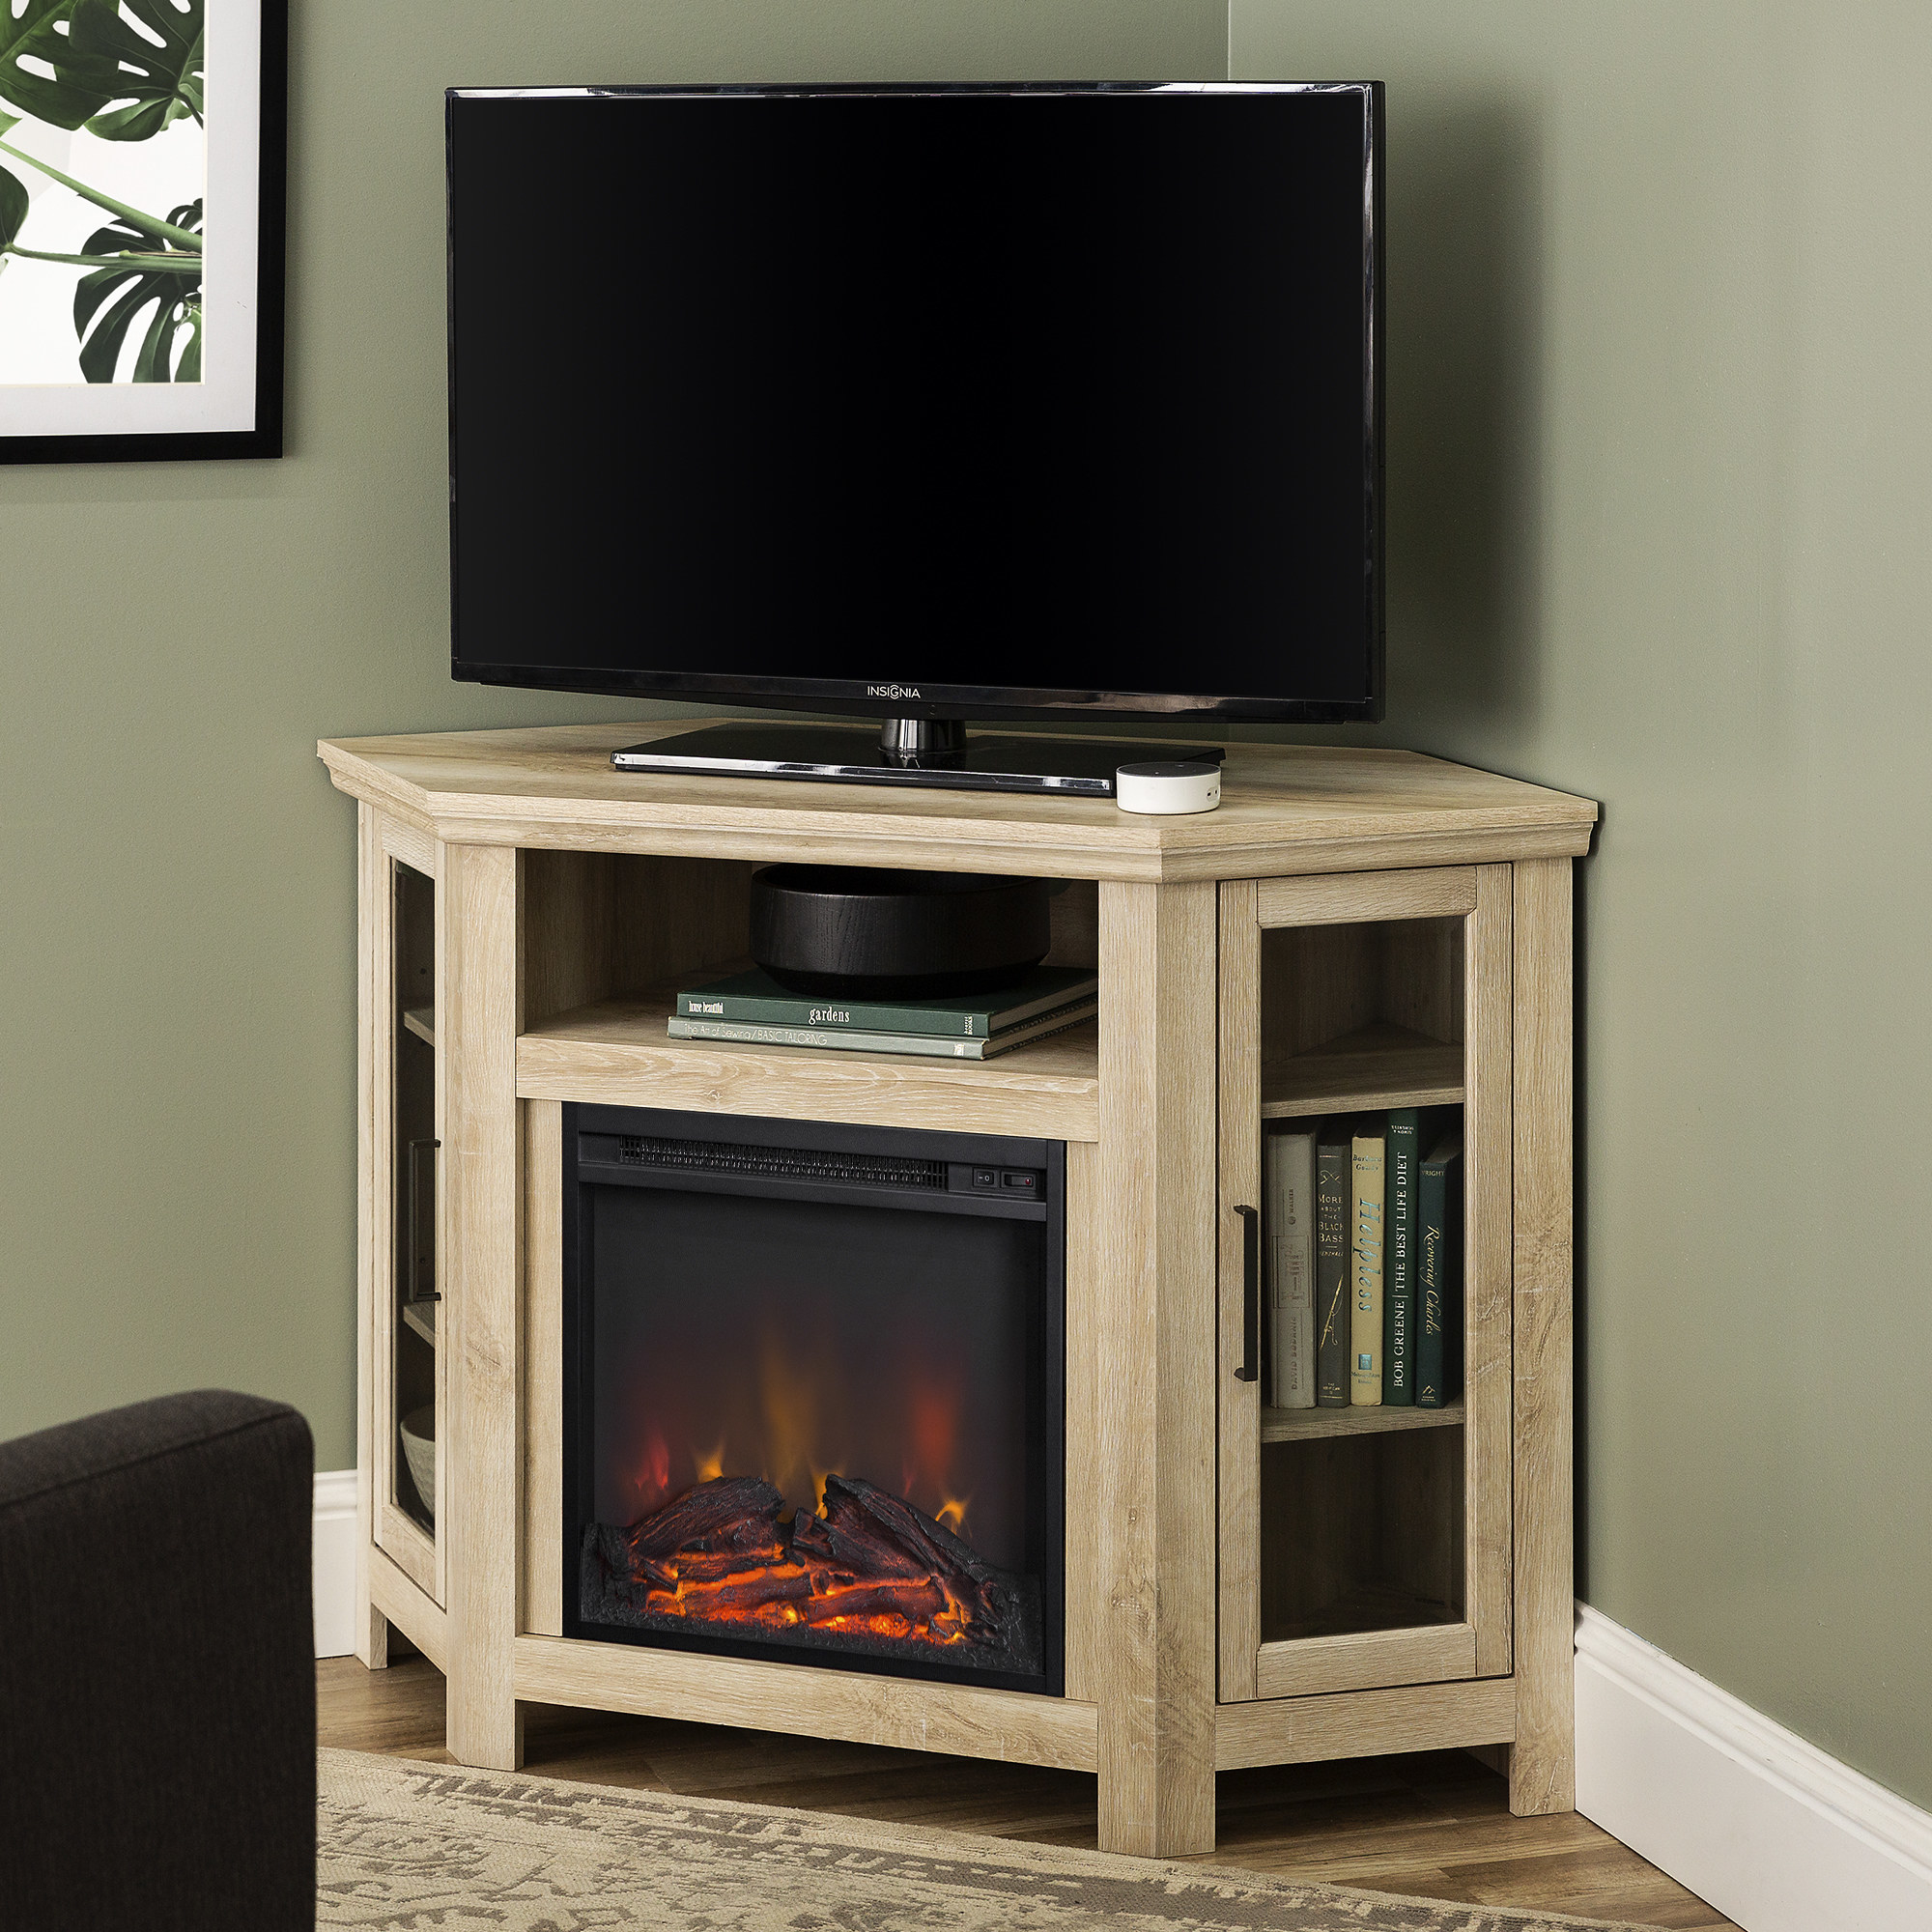 The fireplace TV stand